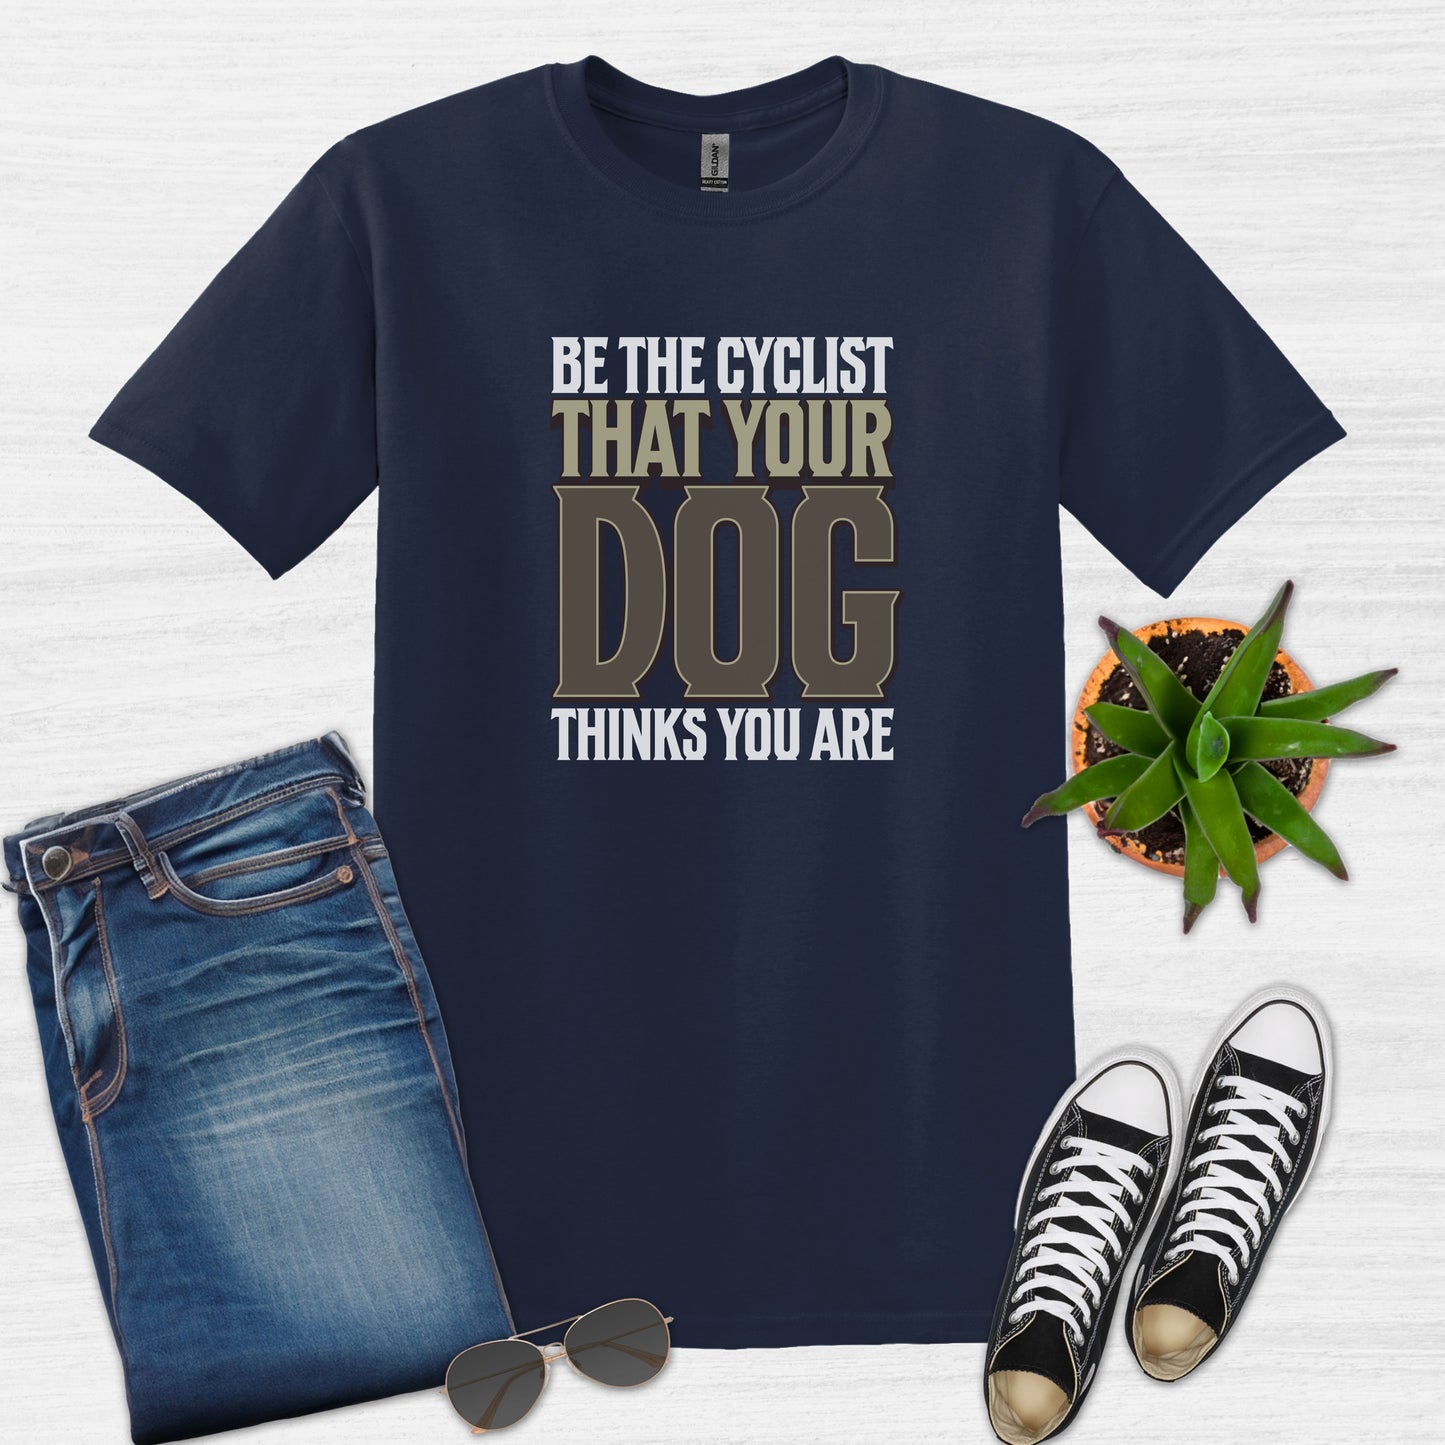 Bike Bliss Be the cyclist that your dog thinks you are T-Shirt for Men Size Navy